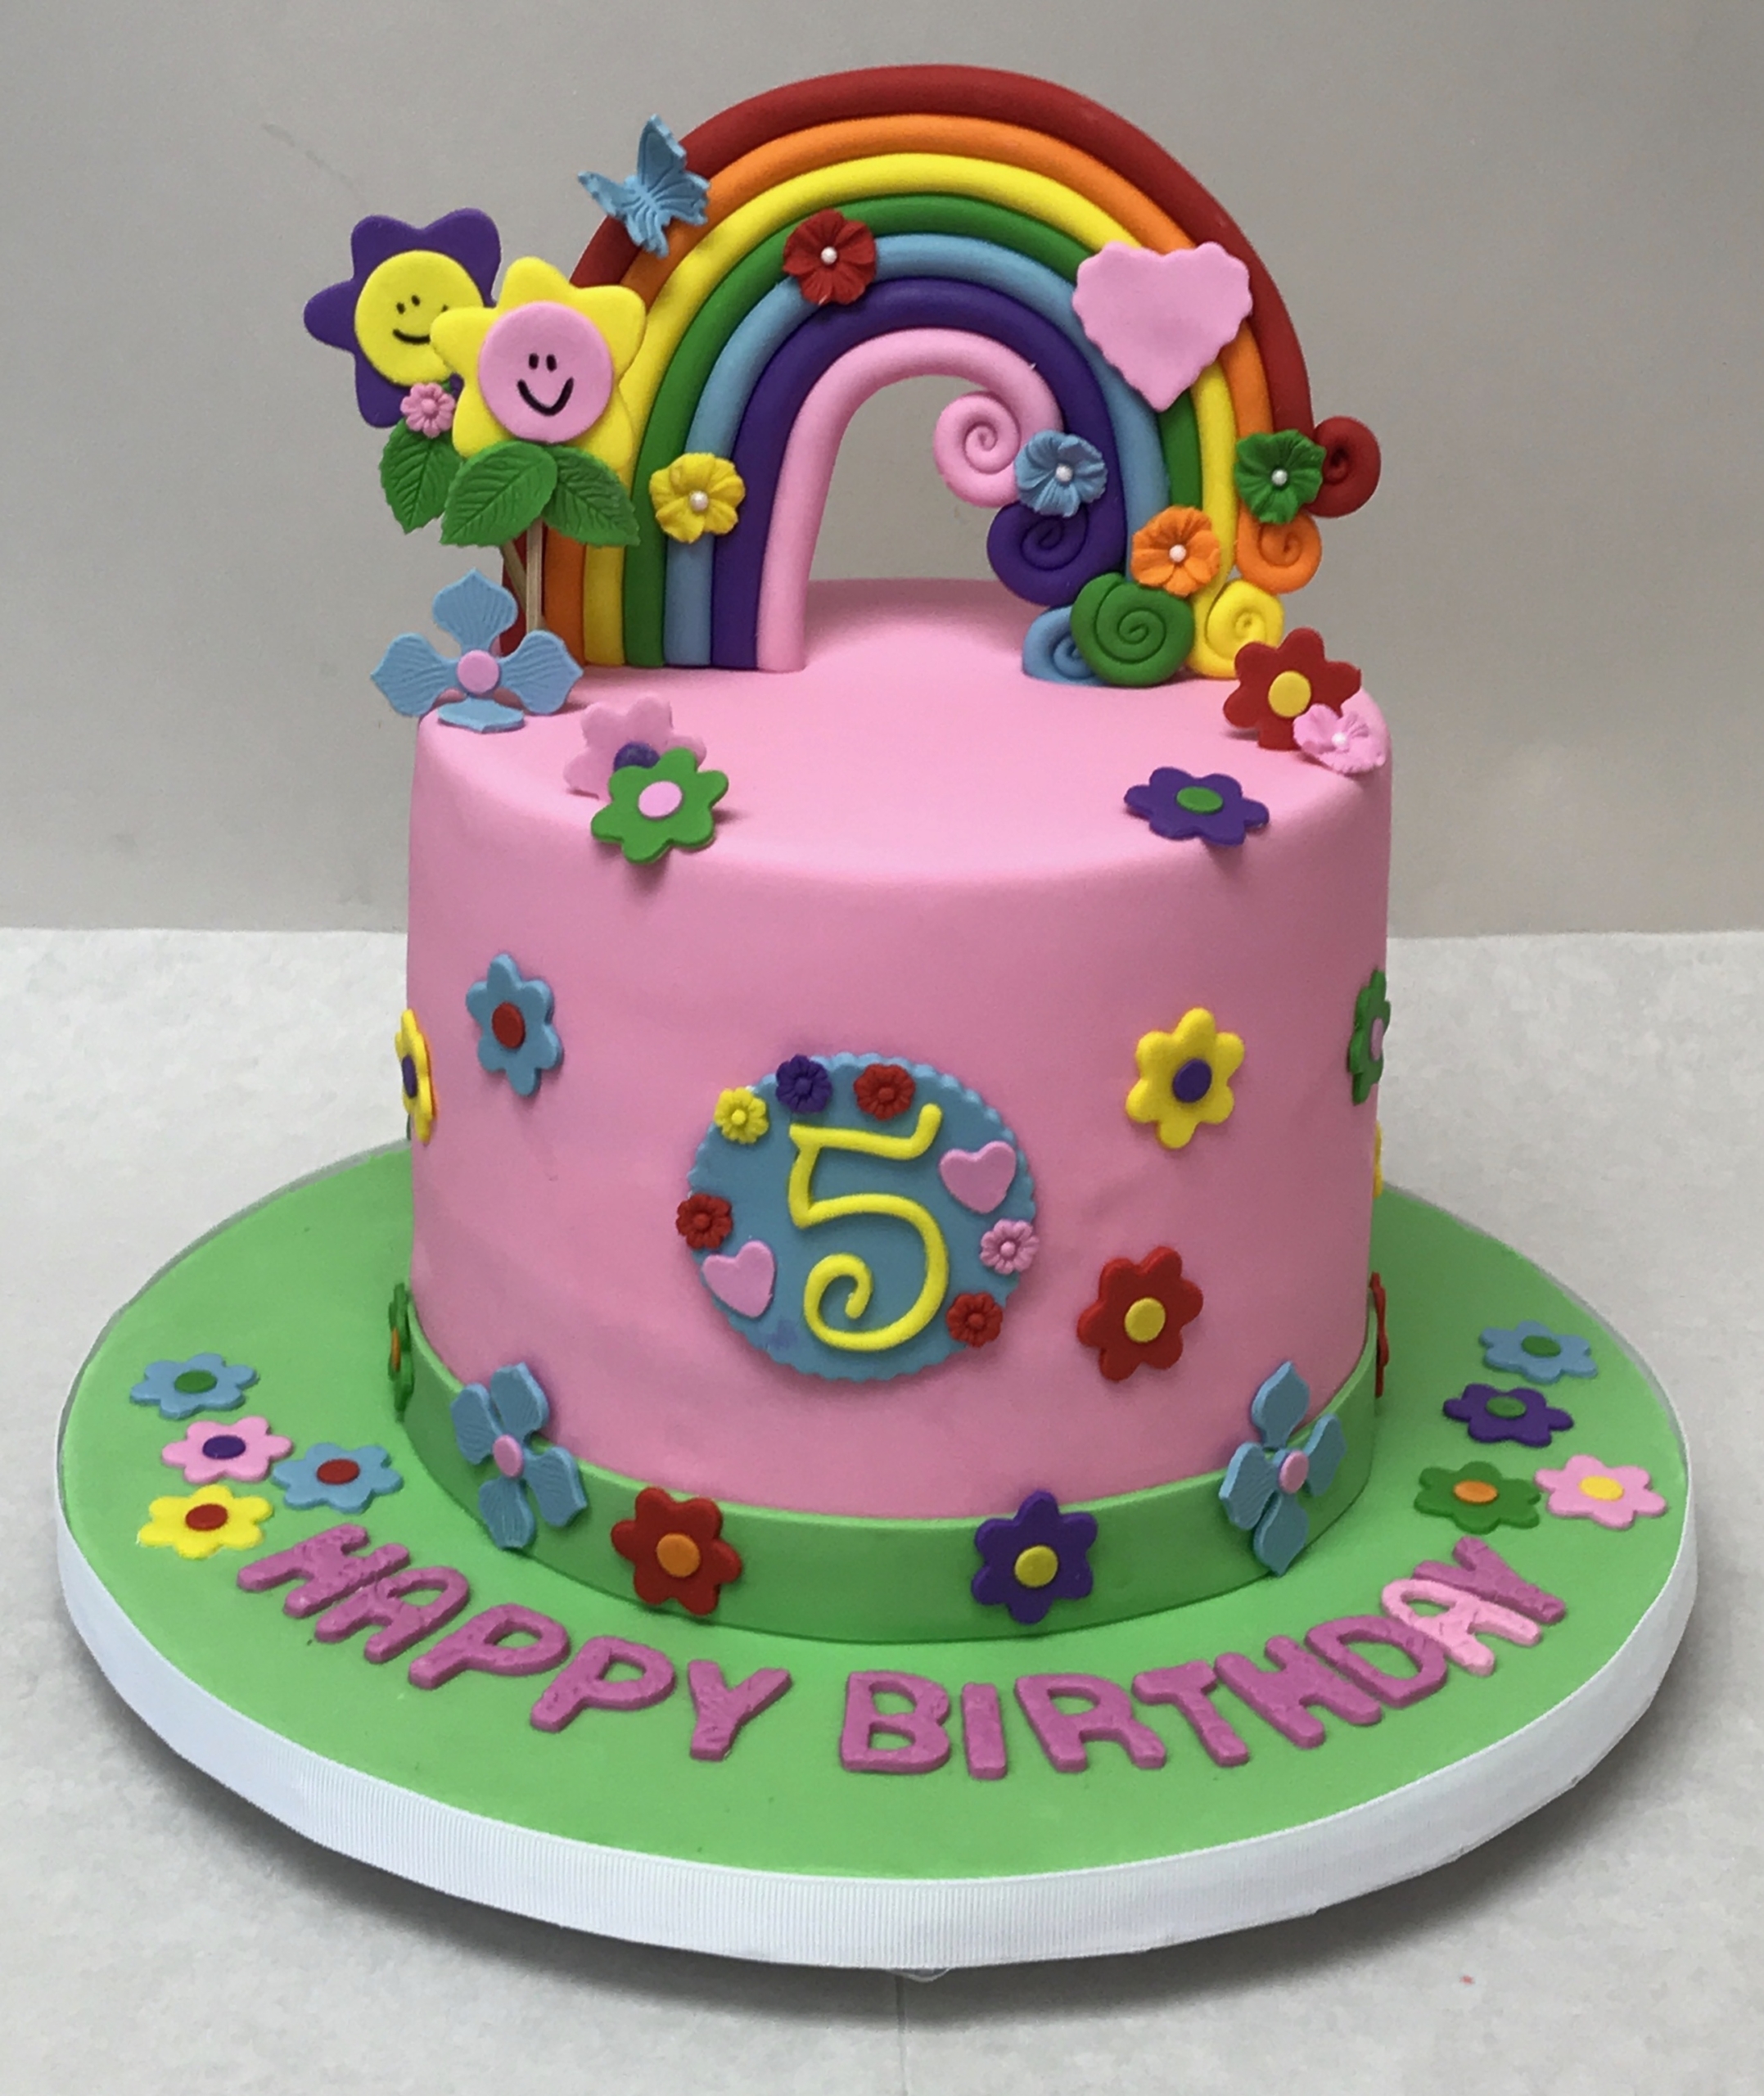 Siima Cakes - Birthday cake for 5 years old girl... | Facebook